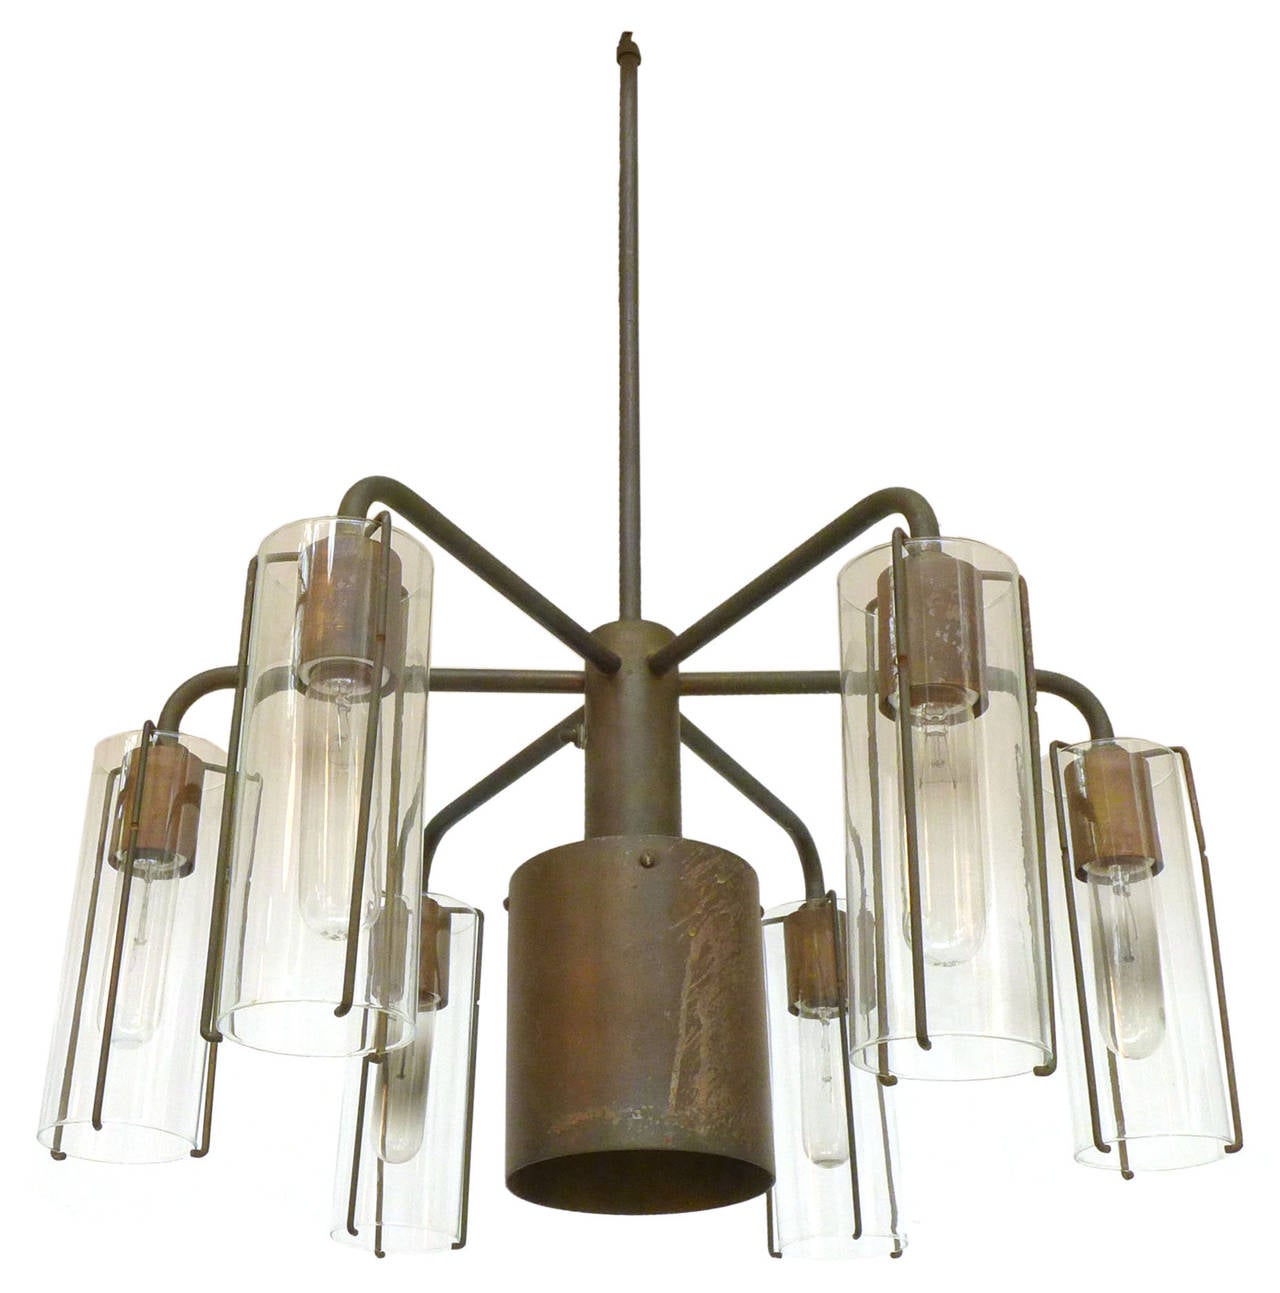 An elegant and modernist bronze and glass chandelier designed by Stuart Barnes for Robert Long, Inc. This dramatic fixture has a rich patina, one central recessed downlight and six additional lamps housed in the original glass hurricane shades. A